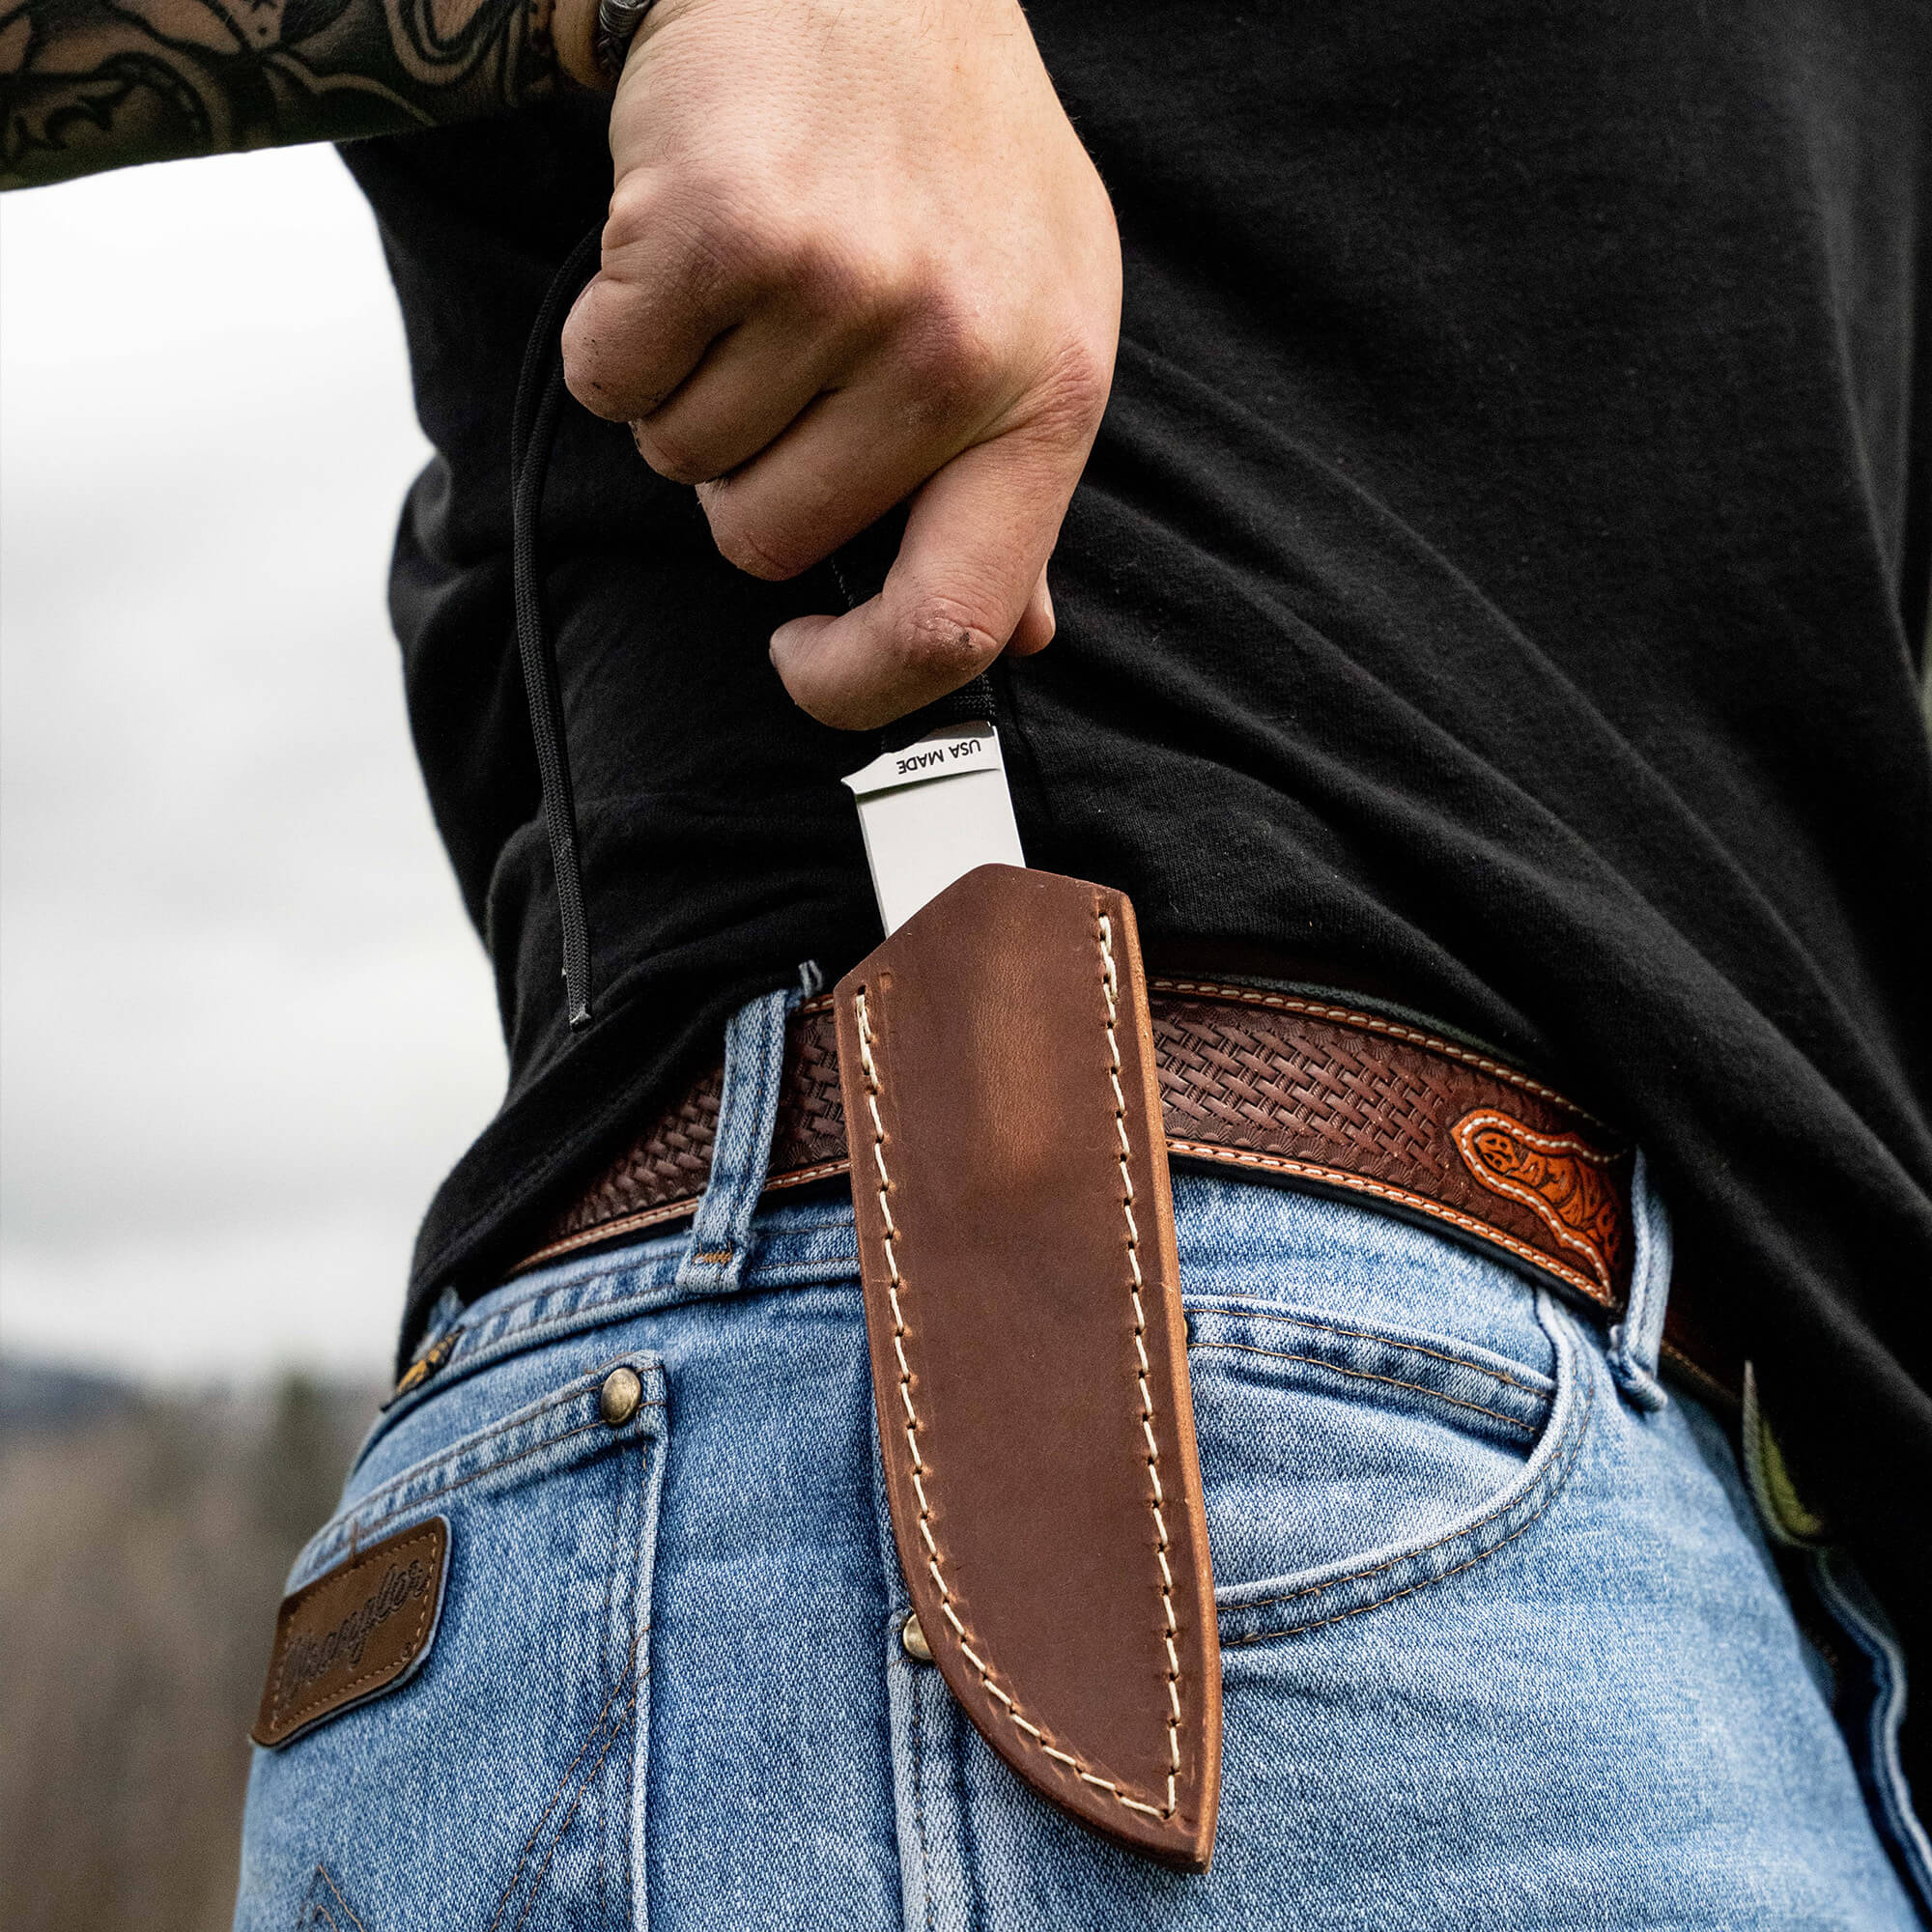 STONED GOAT 2.0 LEATHER SHEATH - VERTICAL BELT CARRY